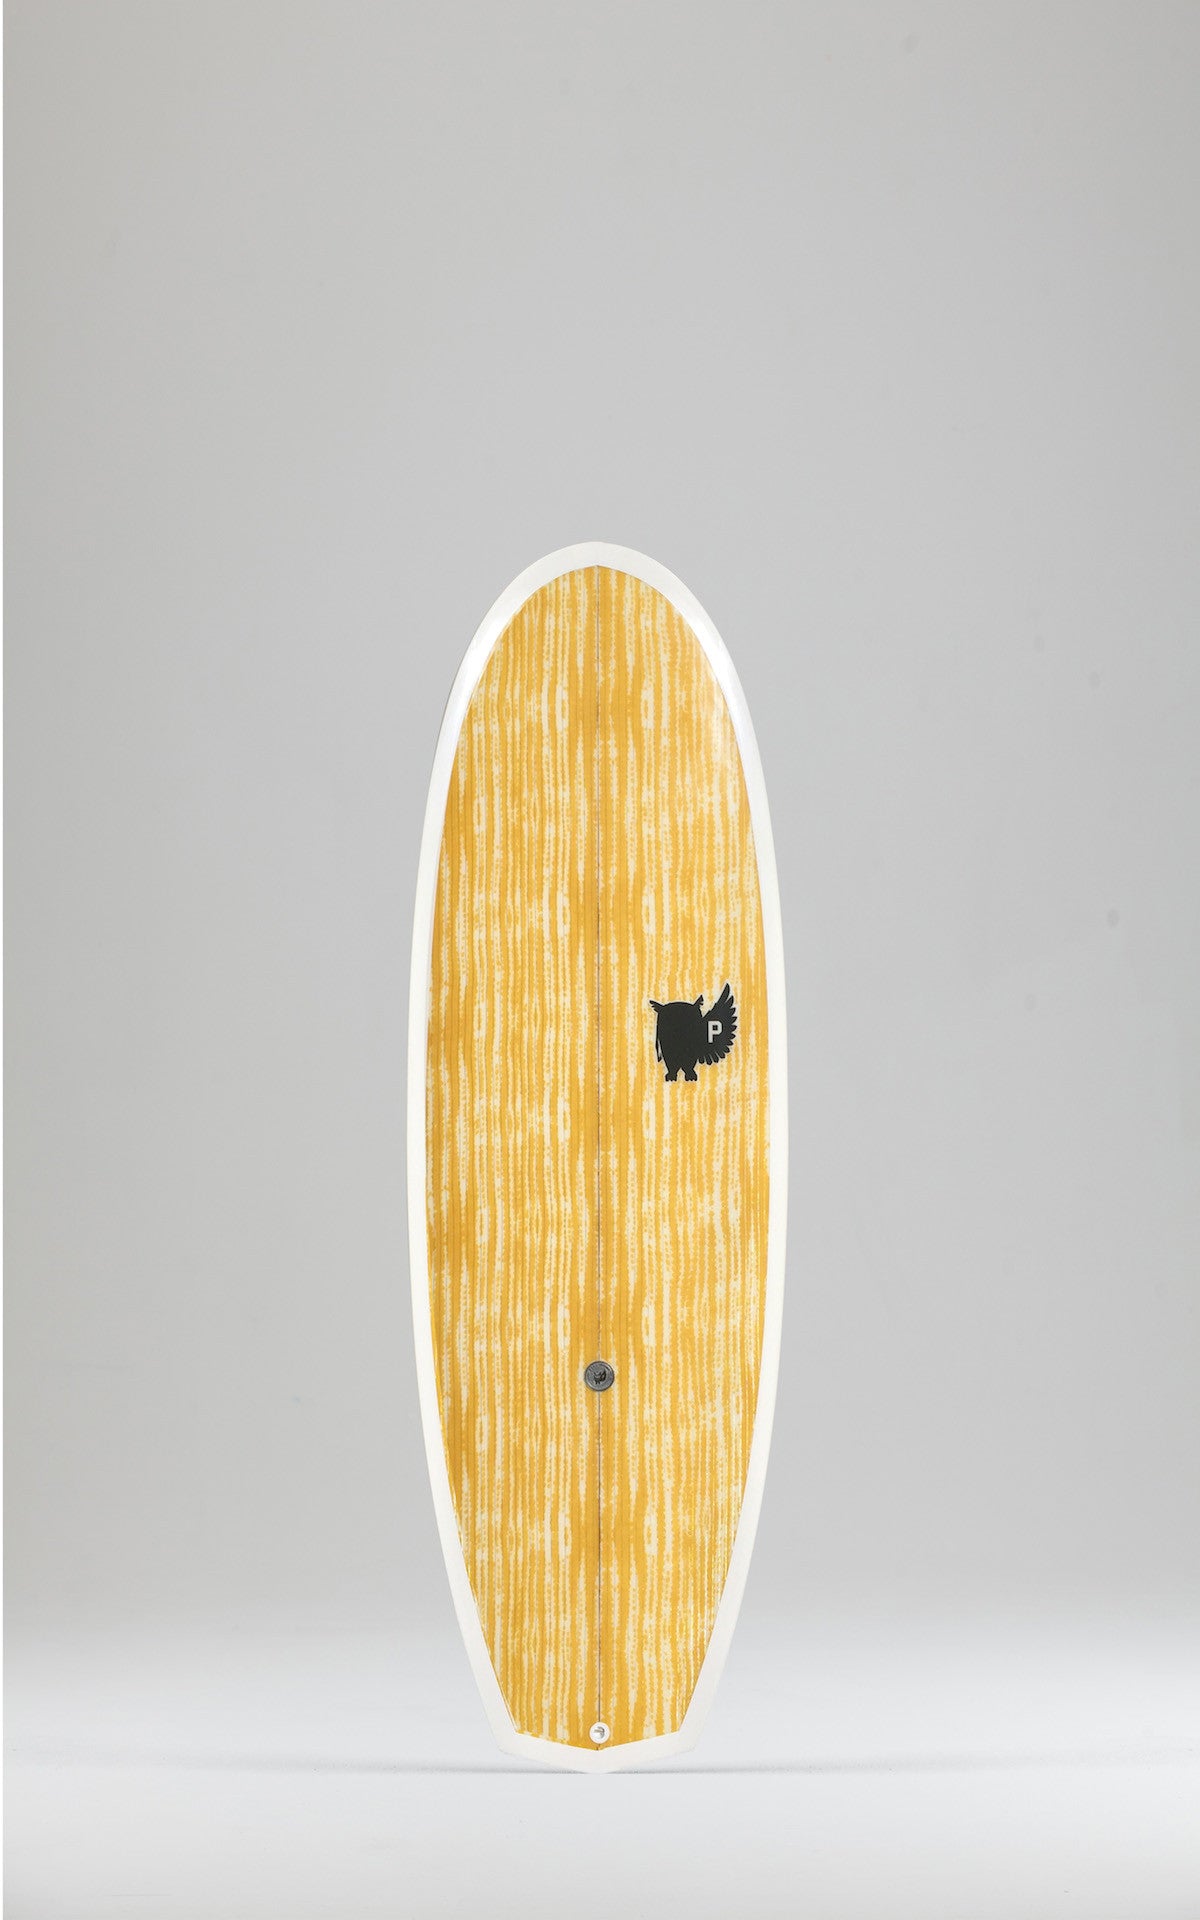 PIETY Surfboards - Mini Simmons